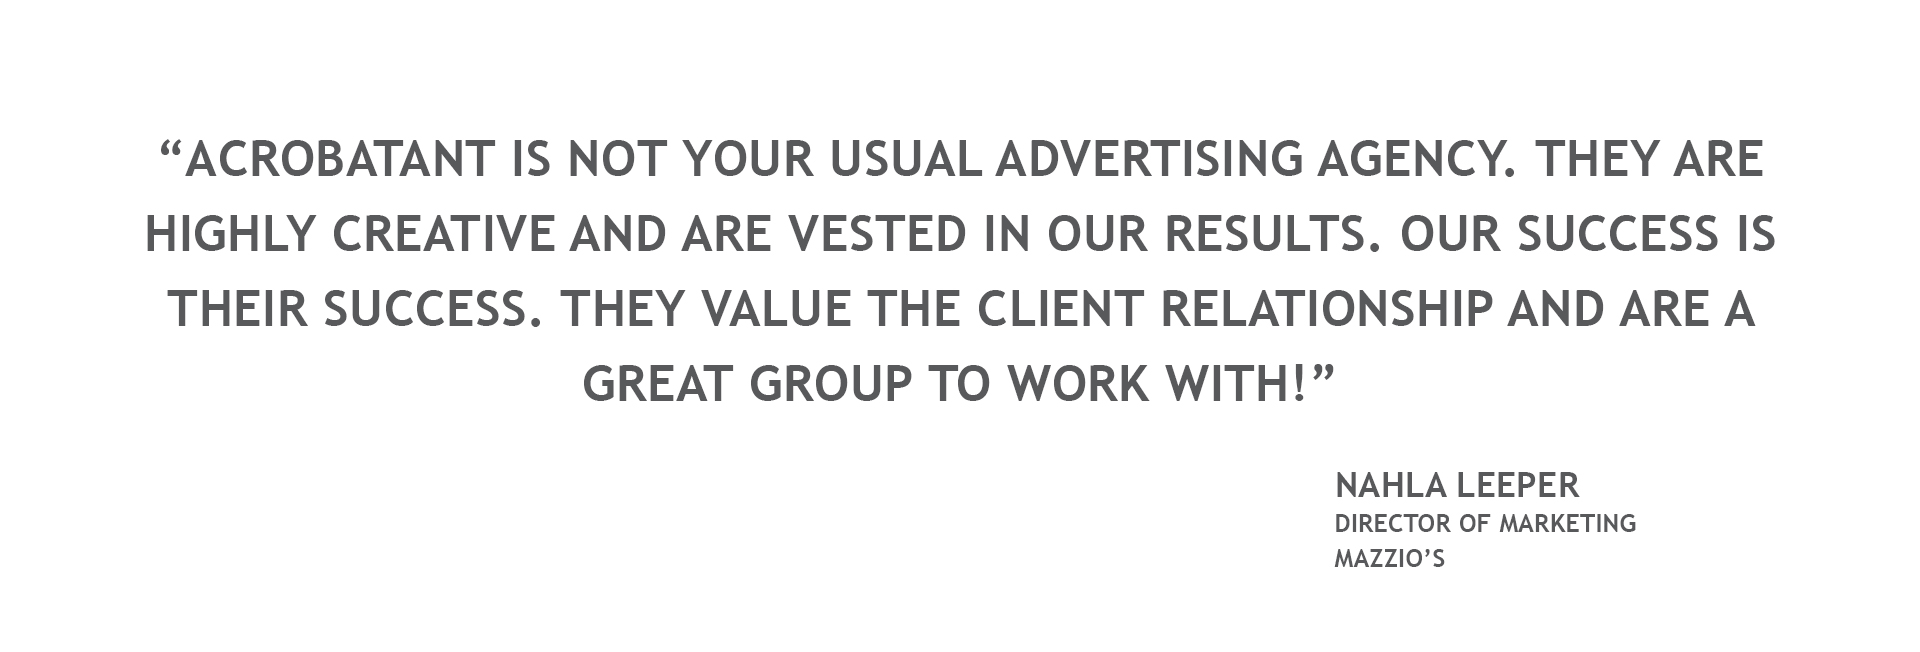 Client quote from the Mazzio's Director of Marketing